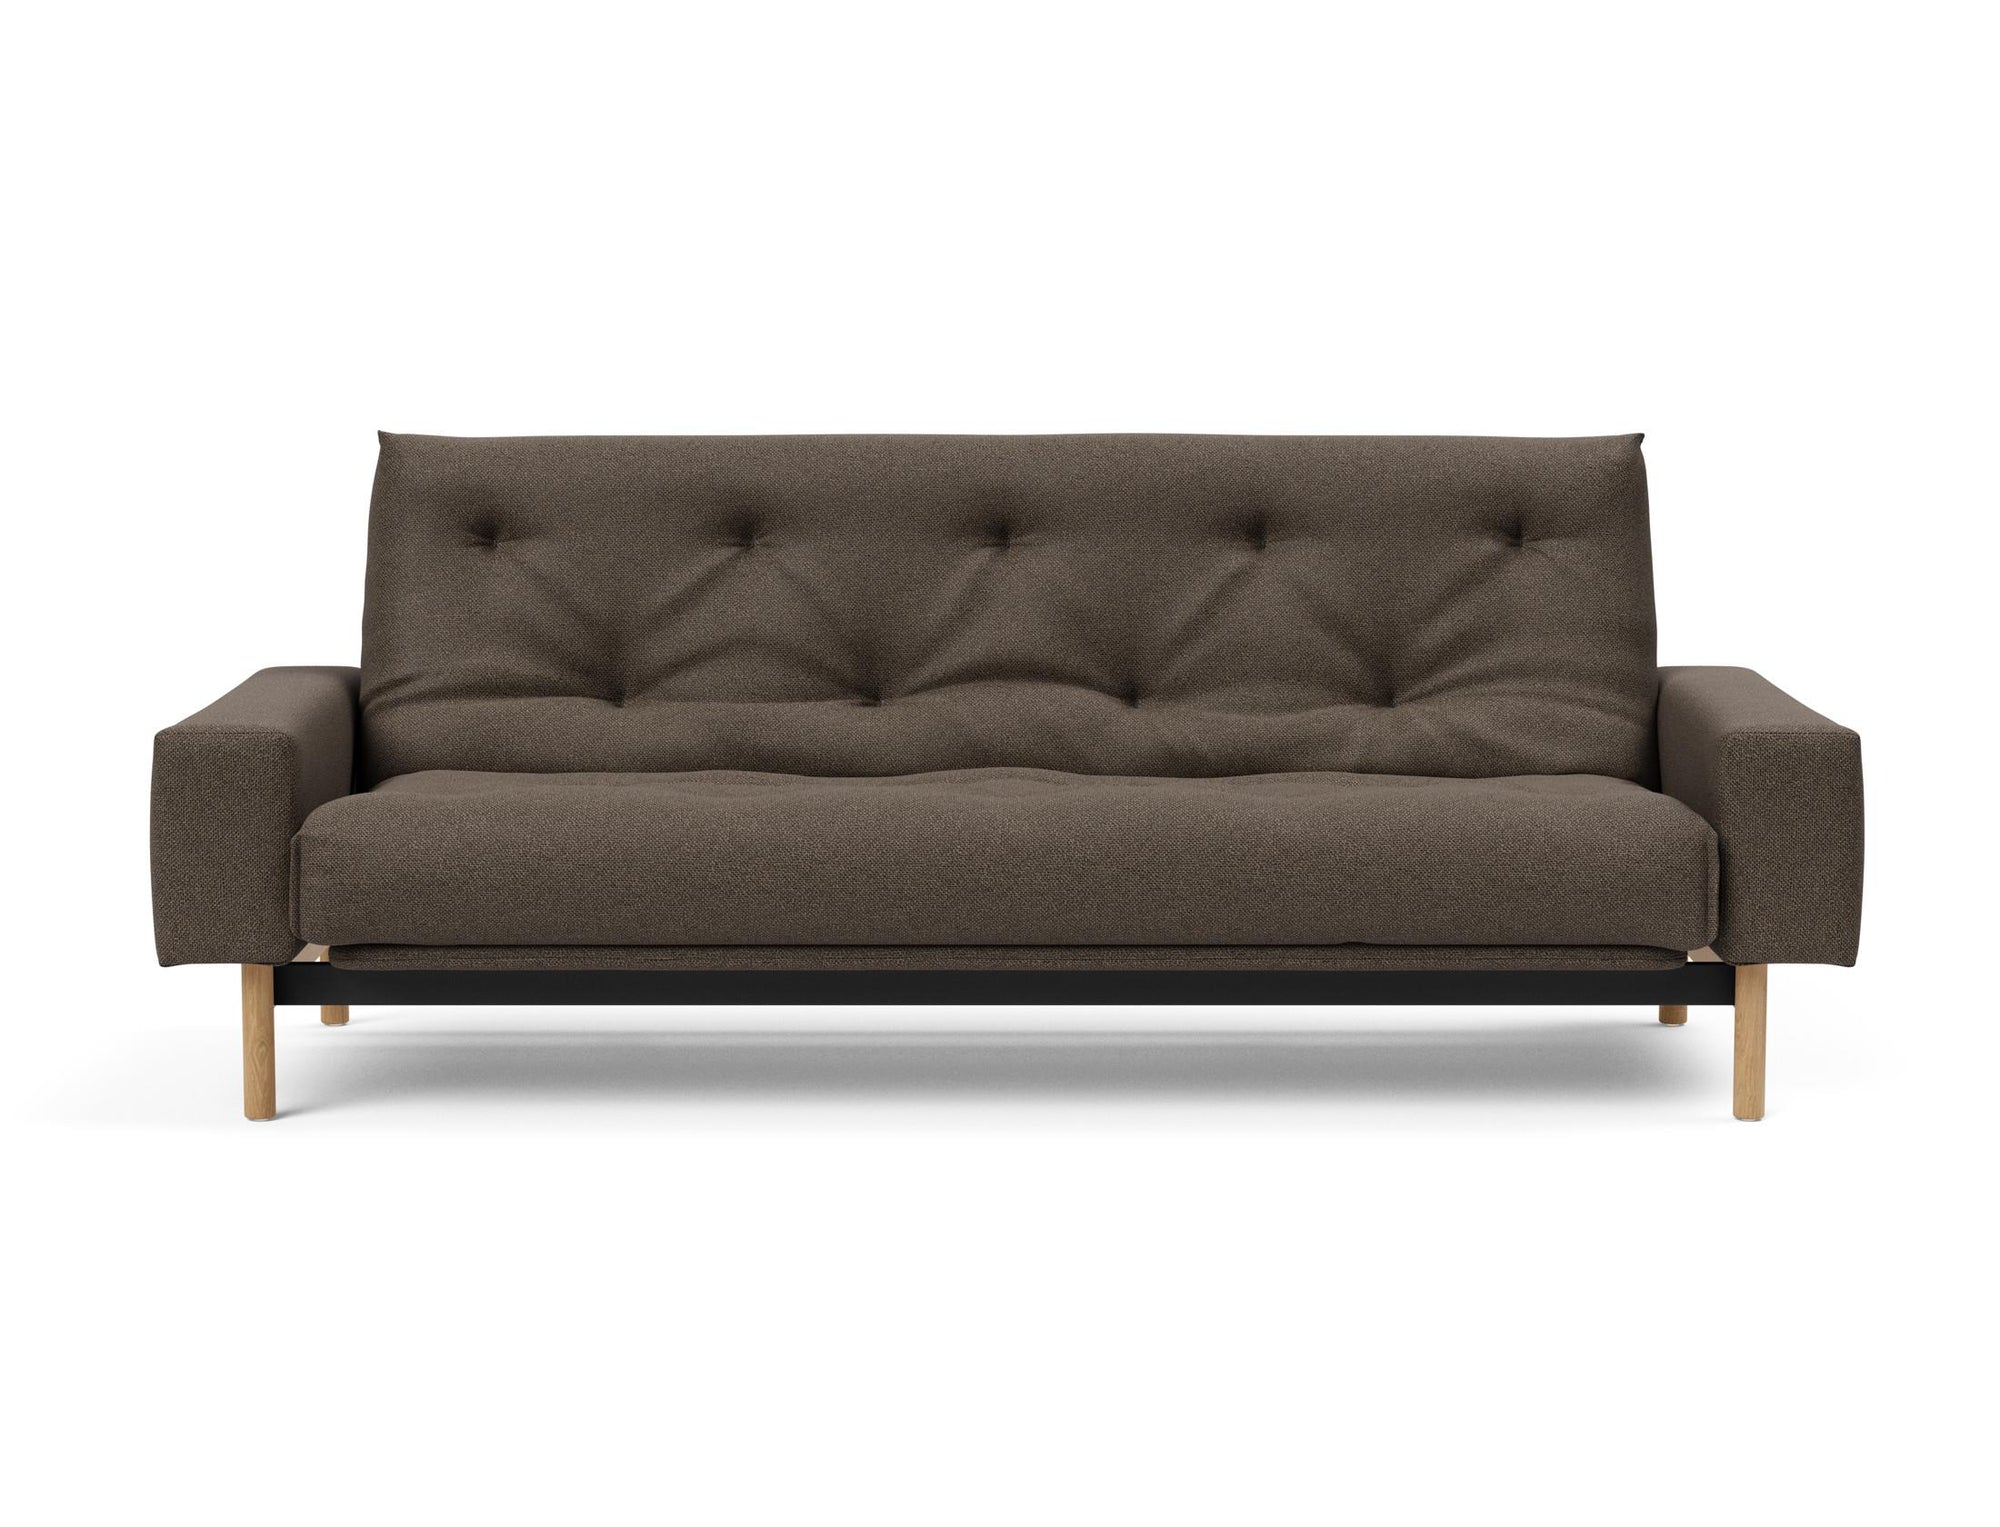 MIMER Luxury Soft Sofa Bed